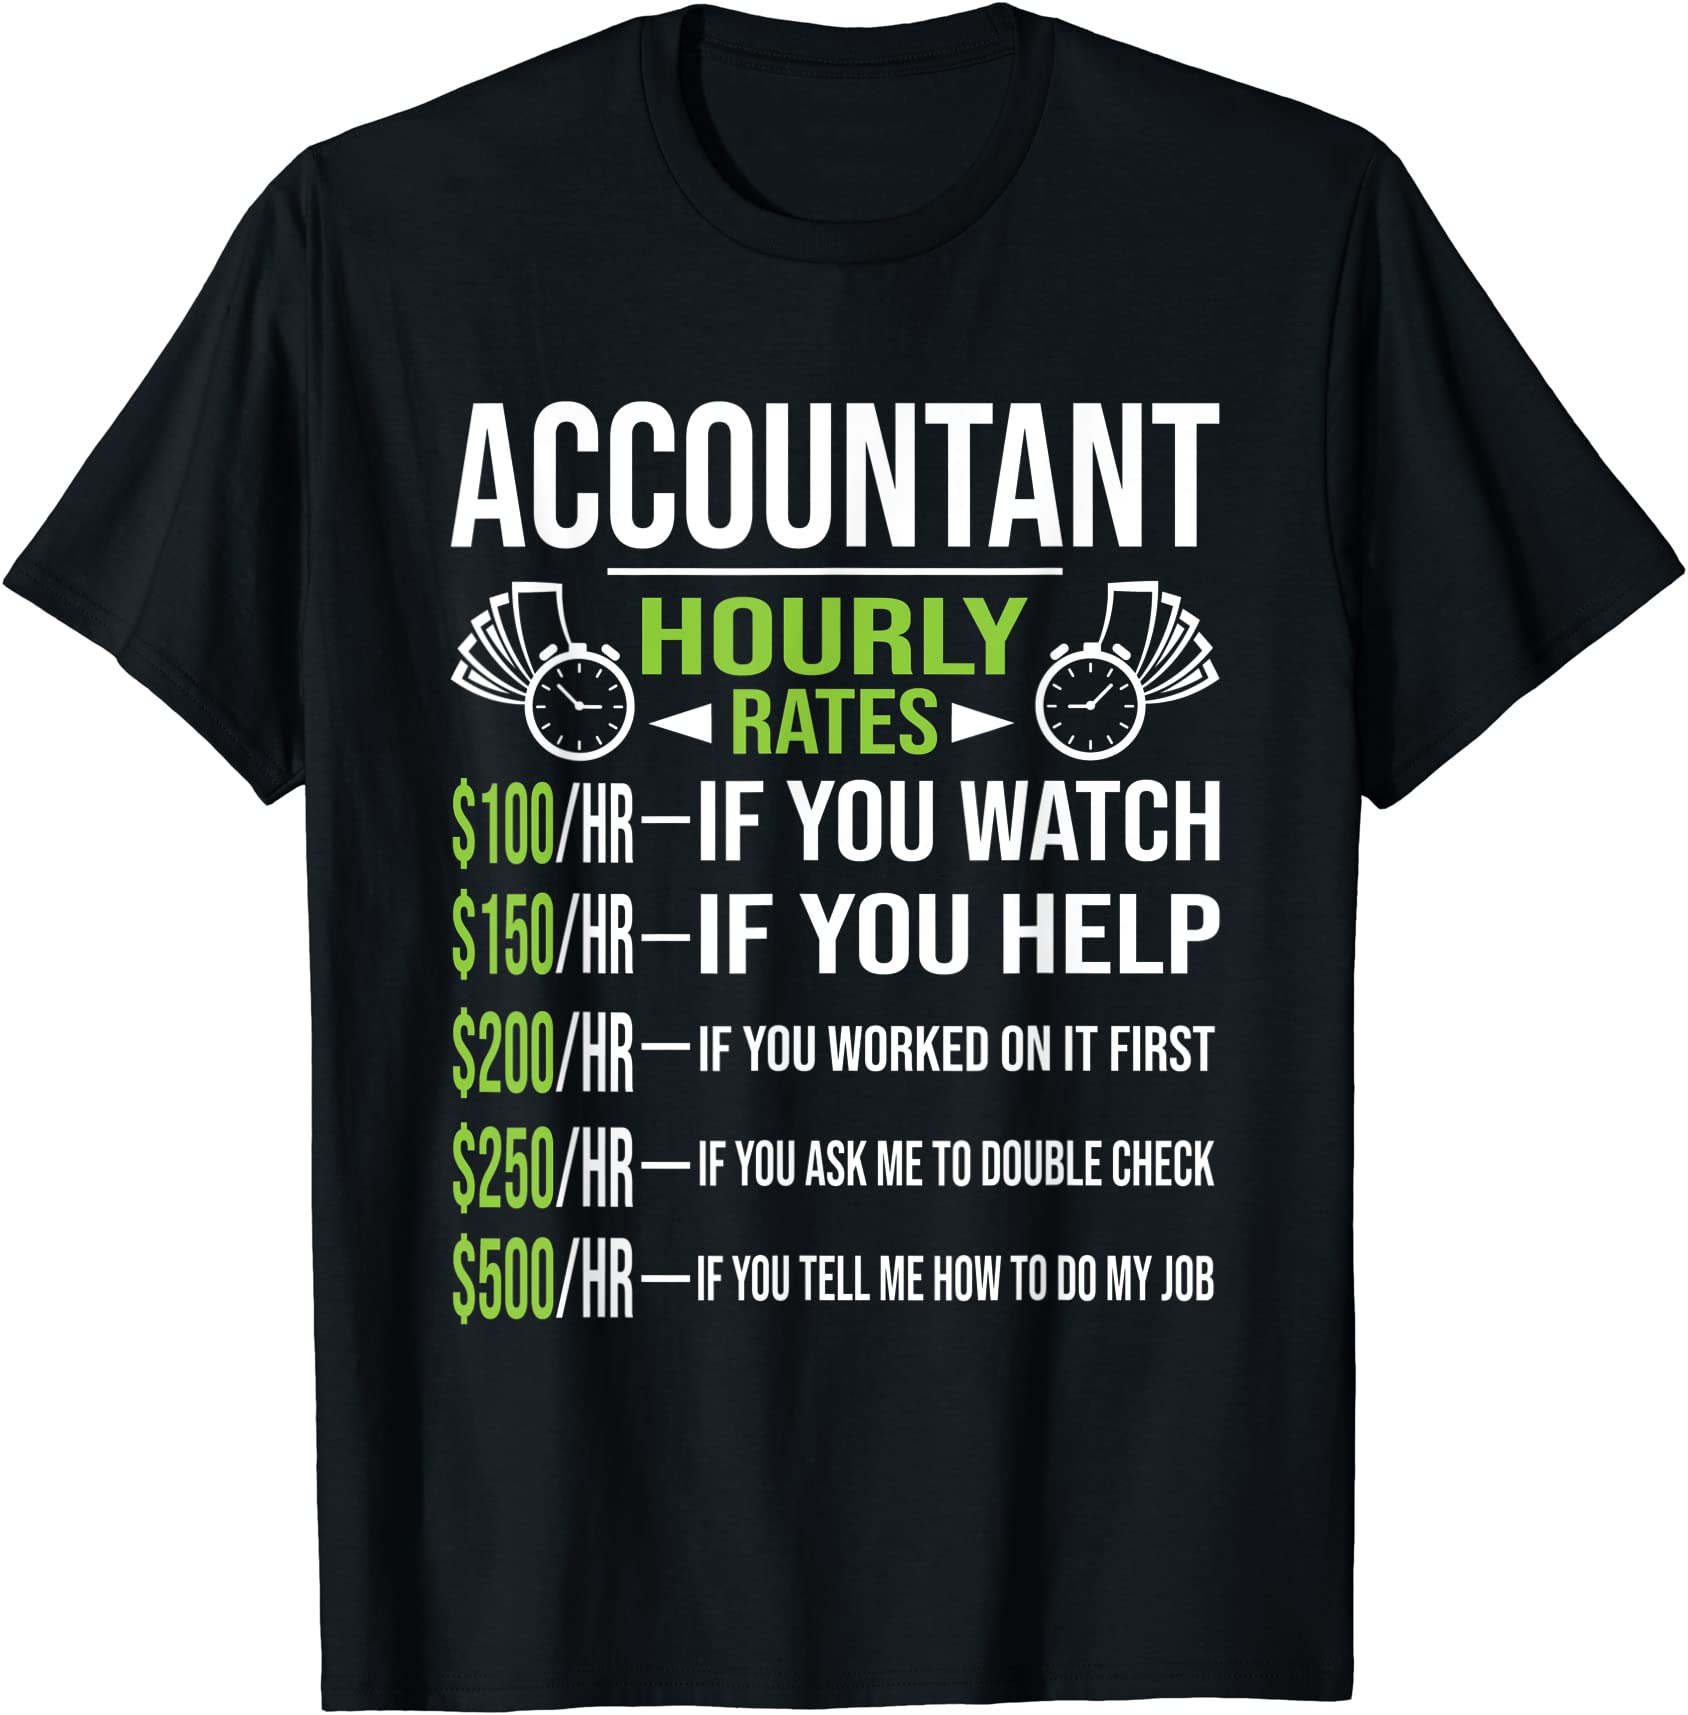 accountant hourly rates funny accounting cpa humor t shirt men - Buy t ...